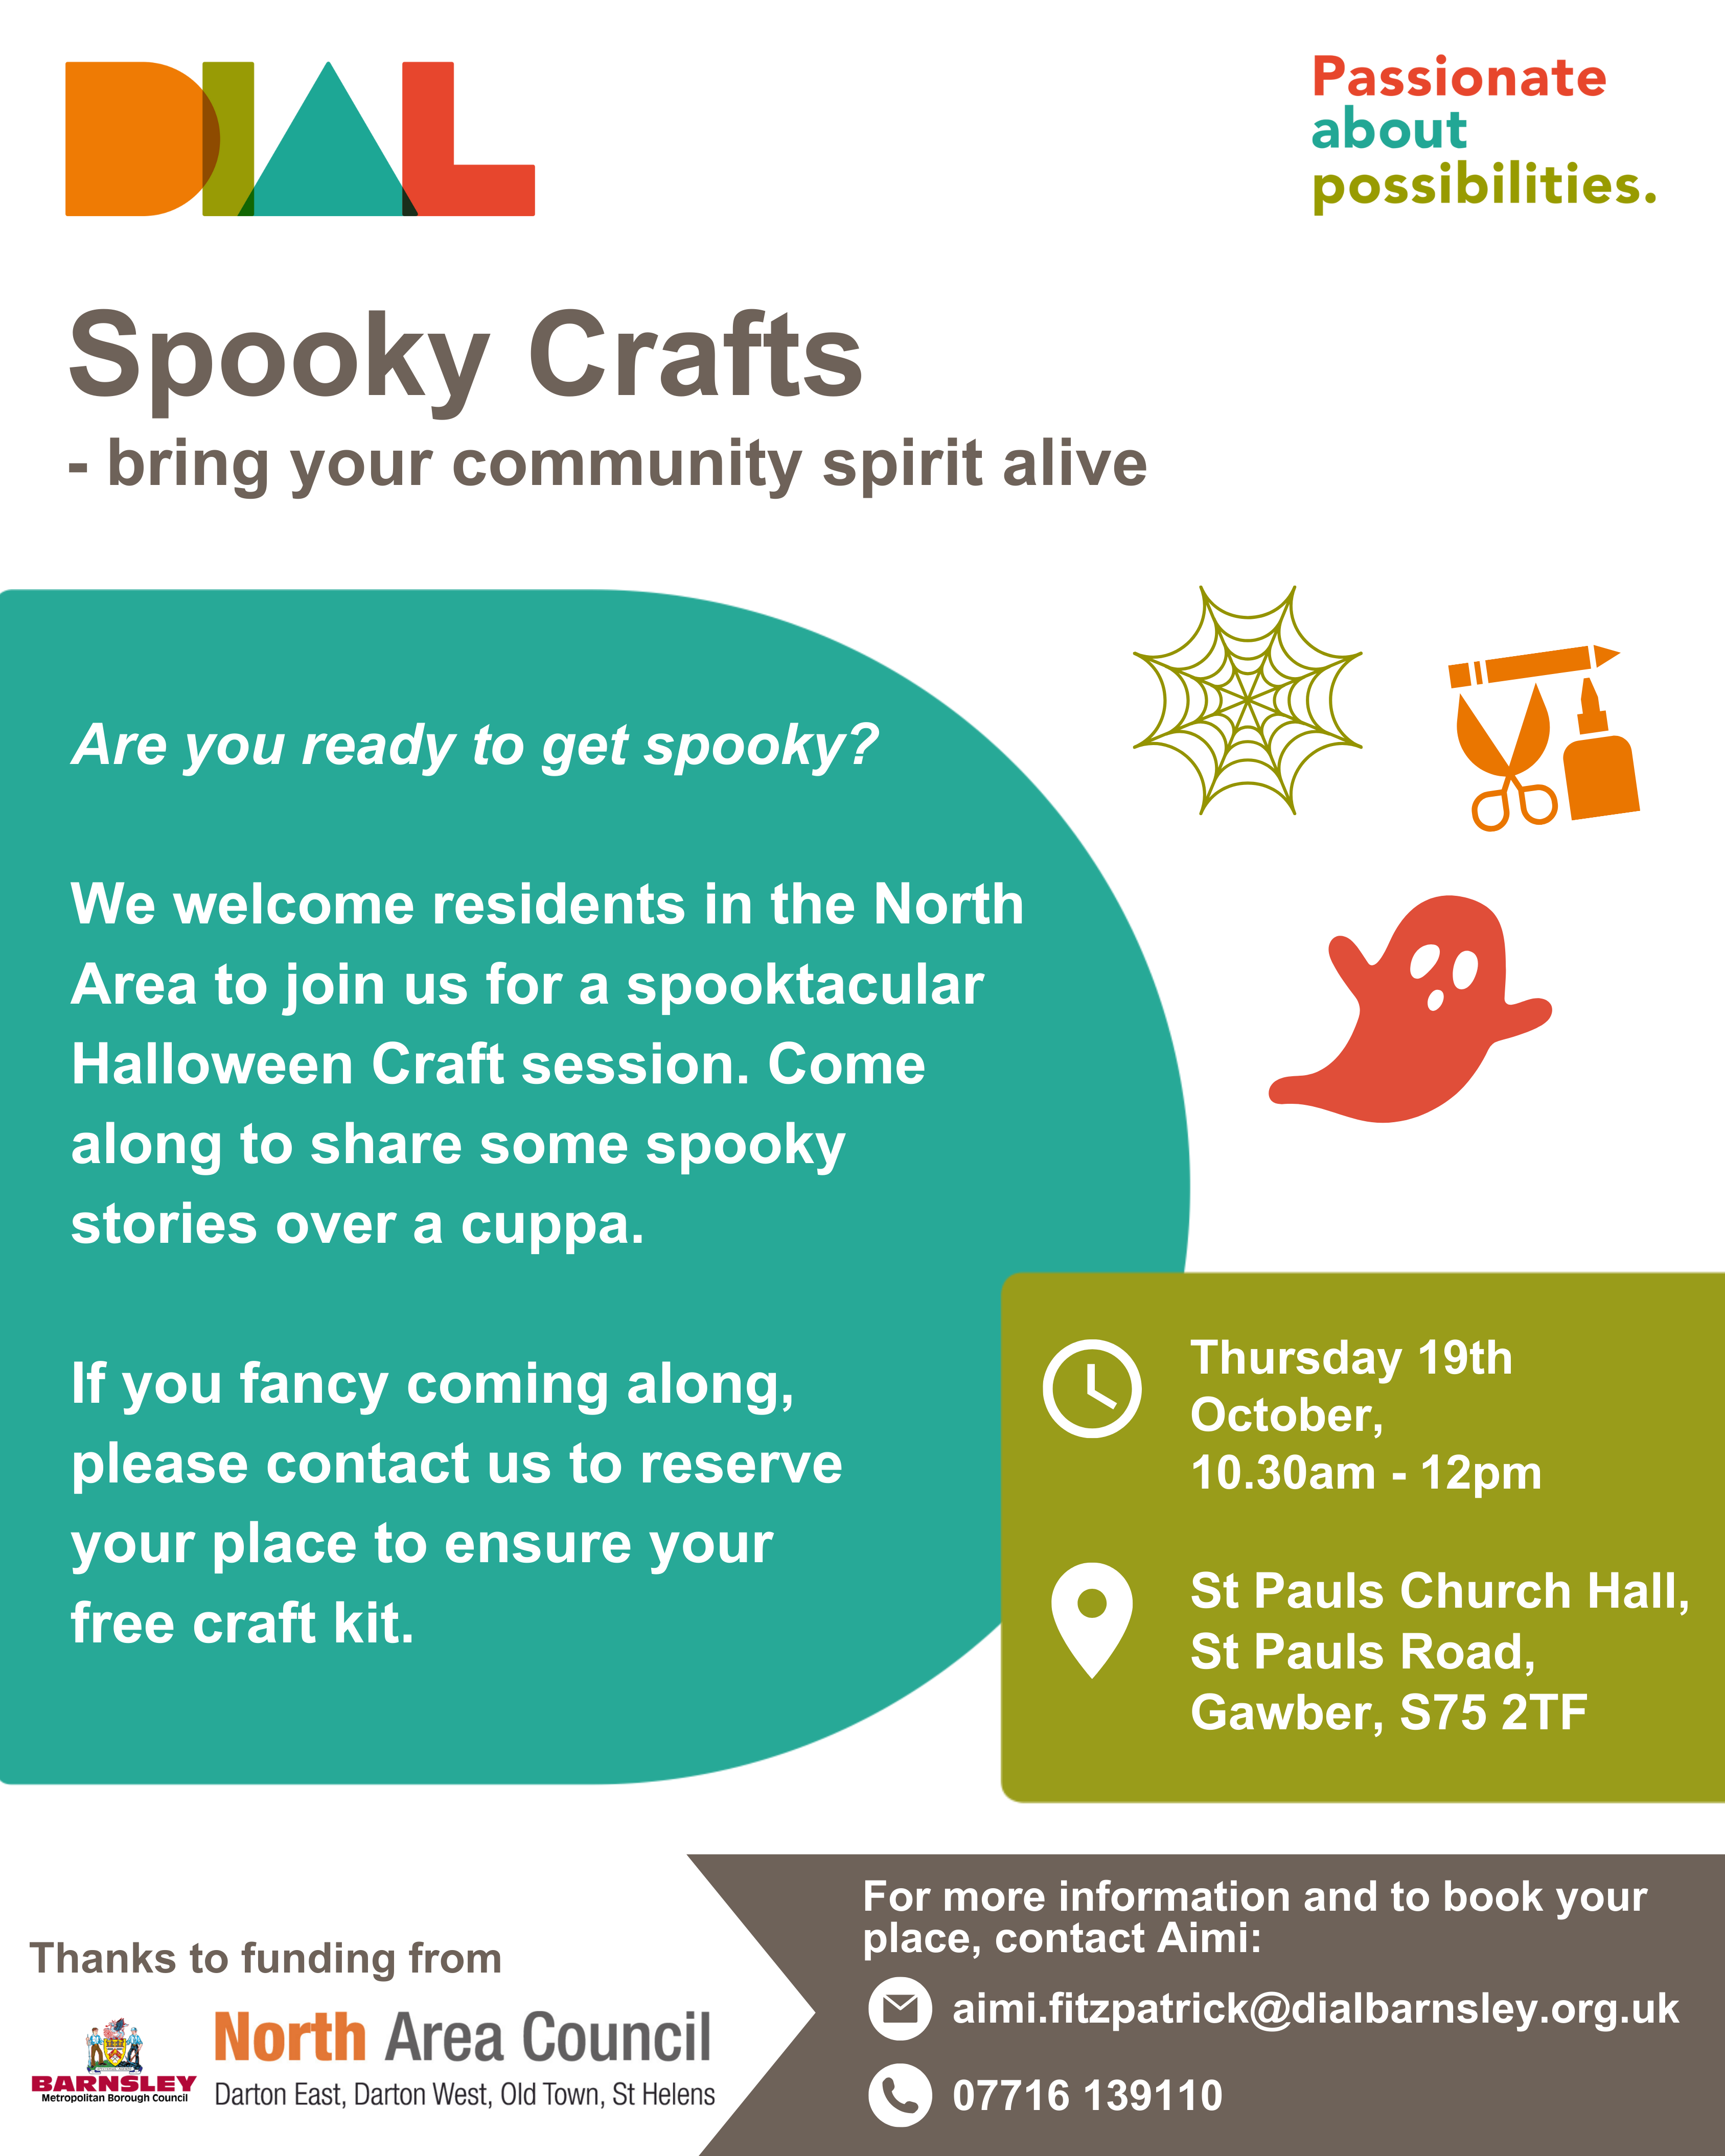 A poster with a white background, with DIAL branding of orange, green, teal and red. It includes line art icons of a picnic basket, sunshine and a selection of photographs.The poster reads: Spooky Crafts - bring your community spirit alive. Are you ready to get spooky? We welcome residents in the North Area to join us for a spooktacular Halloween Craft session. Come along to share some spooky stories over a cuppa. If you fancy coming along, please contact us to reserve your place to ensure your free craft kit.When: Thursday 19th October, 10.30am - 12pm.
Where: St Pauls Church Hall, St Pauls Road, Gawber, S75 2TF.For more information and to book your place, contact Aimi by email at aimi.fitzpatrick@dialbarnsley.org.uk or by phone on 07716 139110.Thanks to funding from Barnsley Metropolitan Borough Council and North Area Council. 